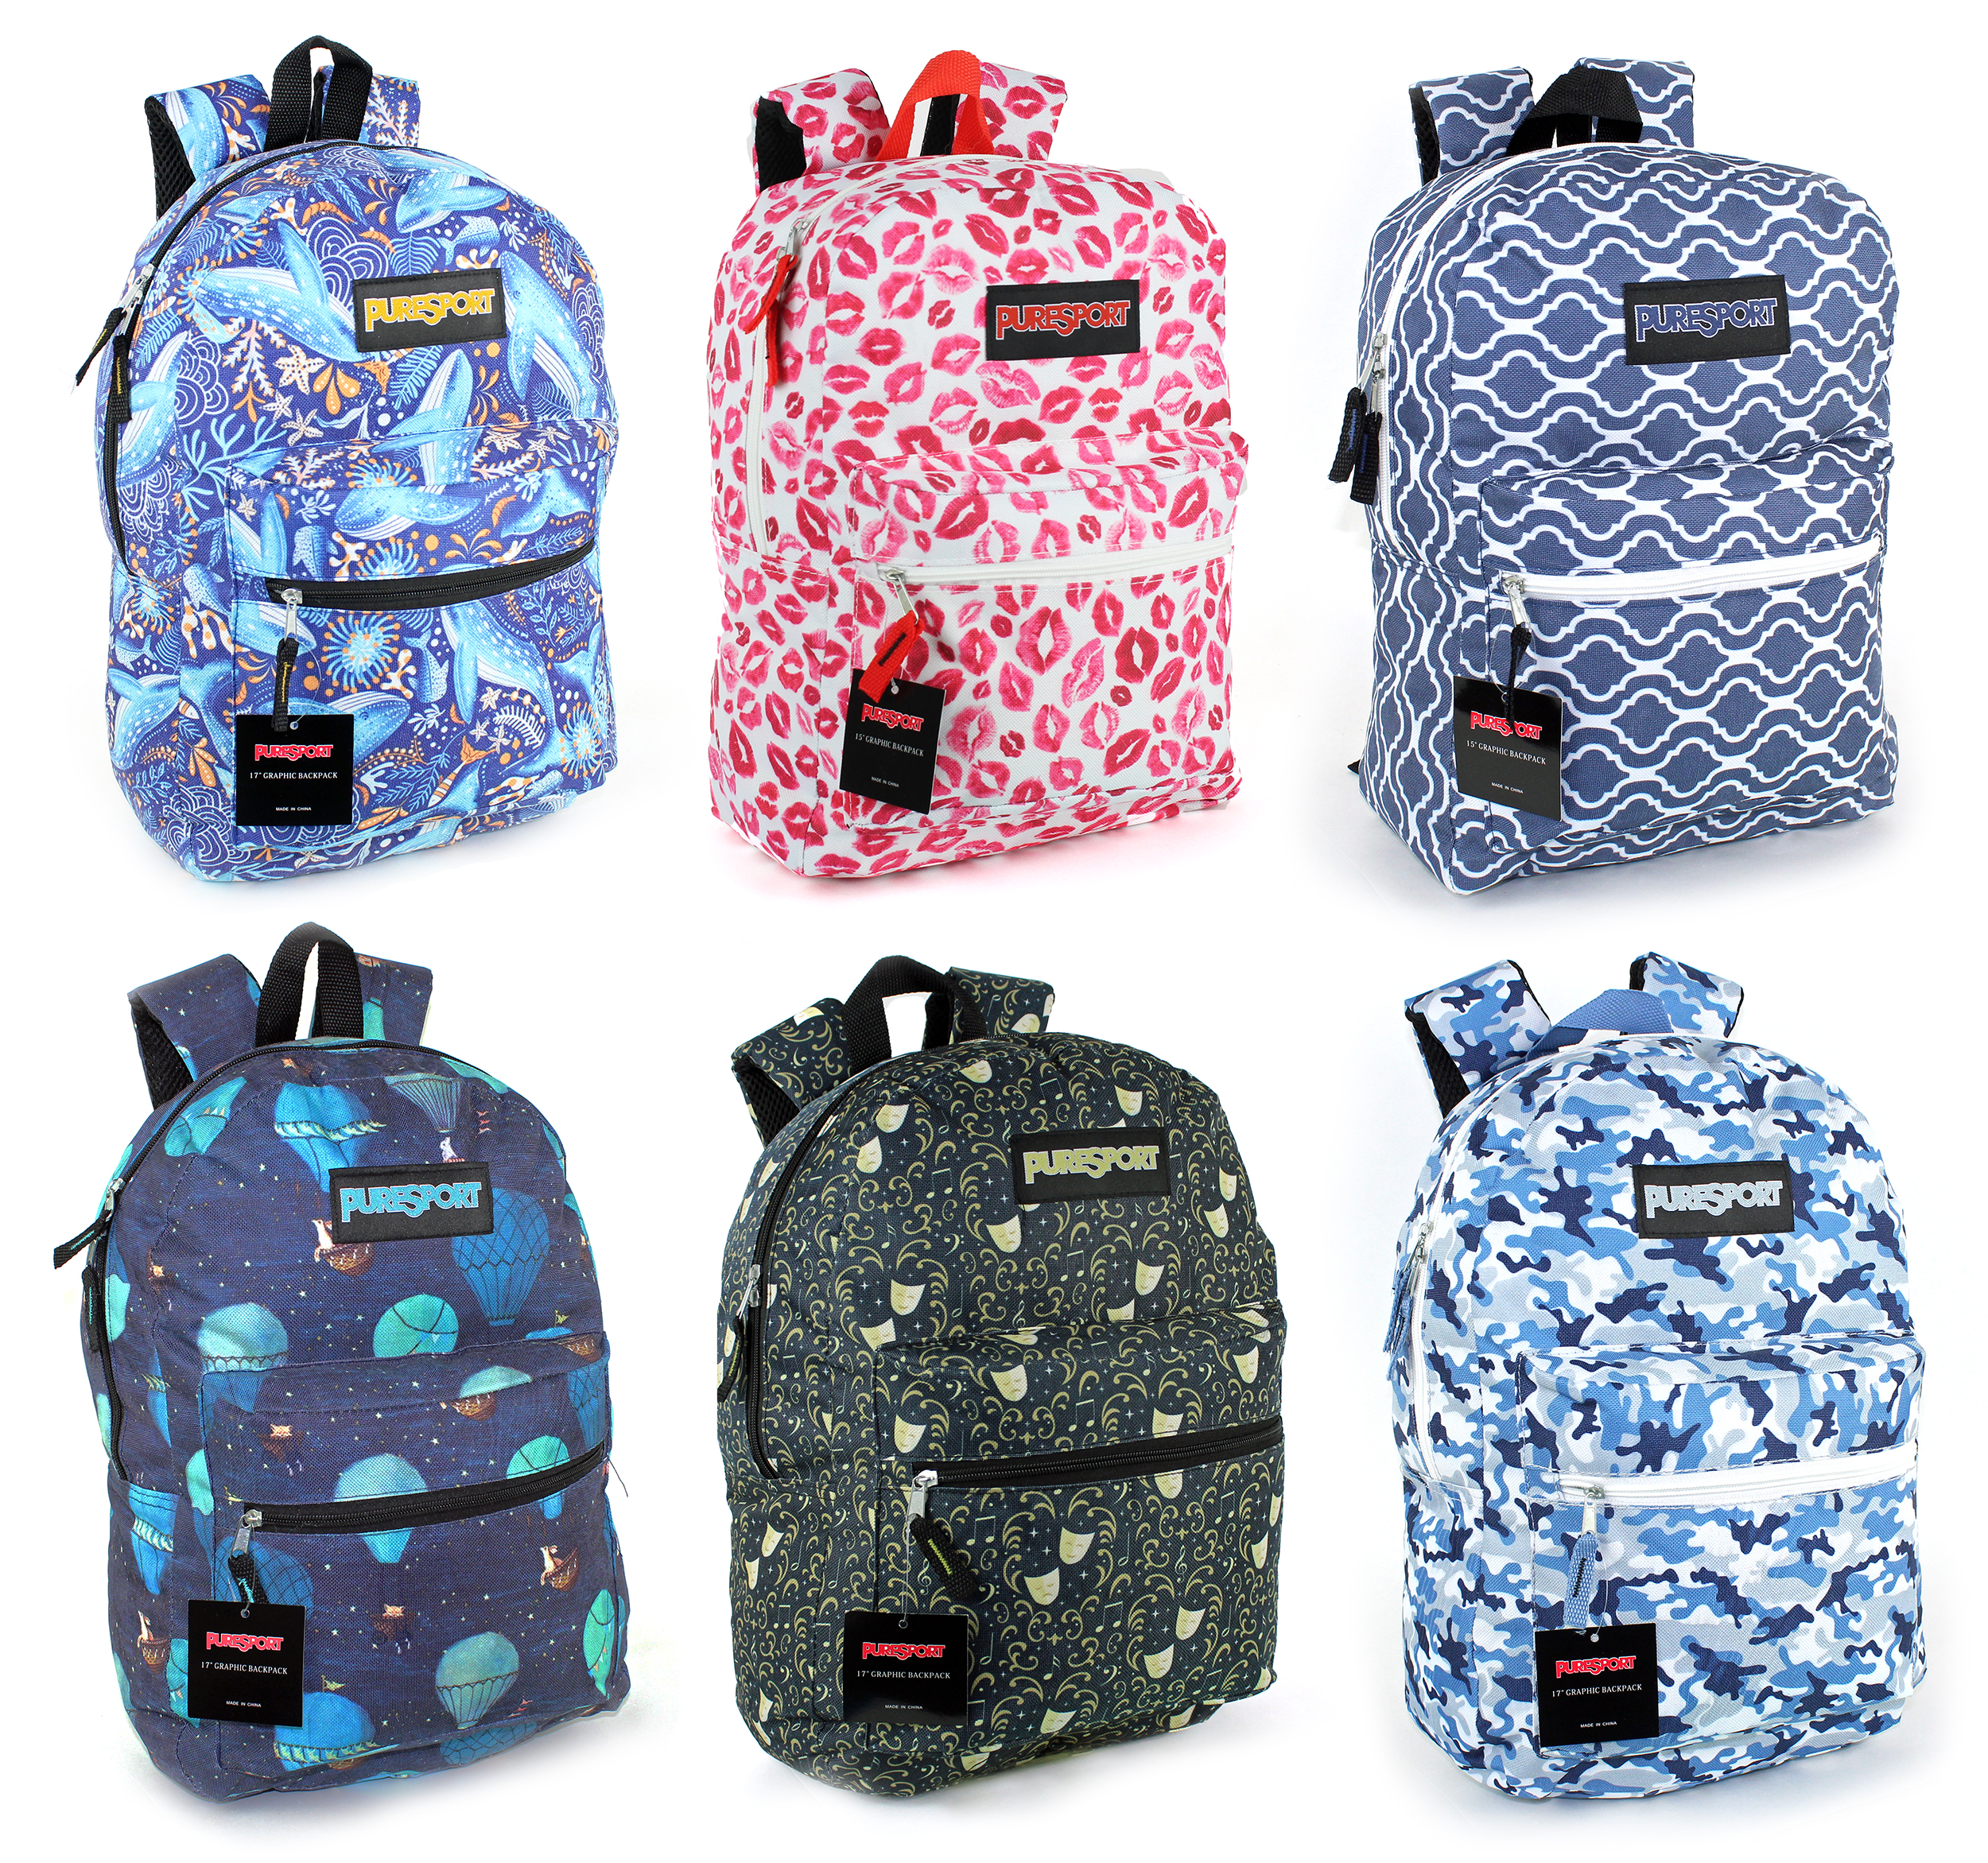 ''17'''' PureSport Graphic BACKPACKs - Assorted Prints''